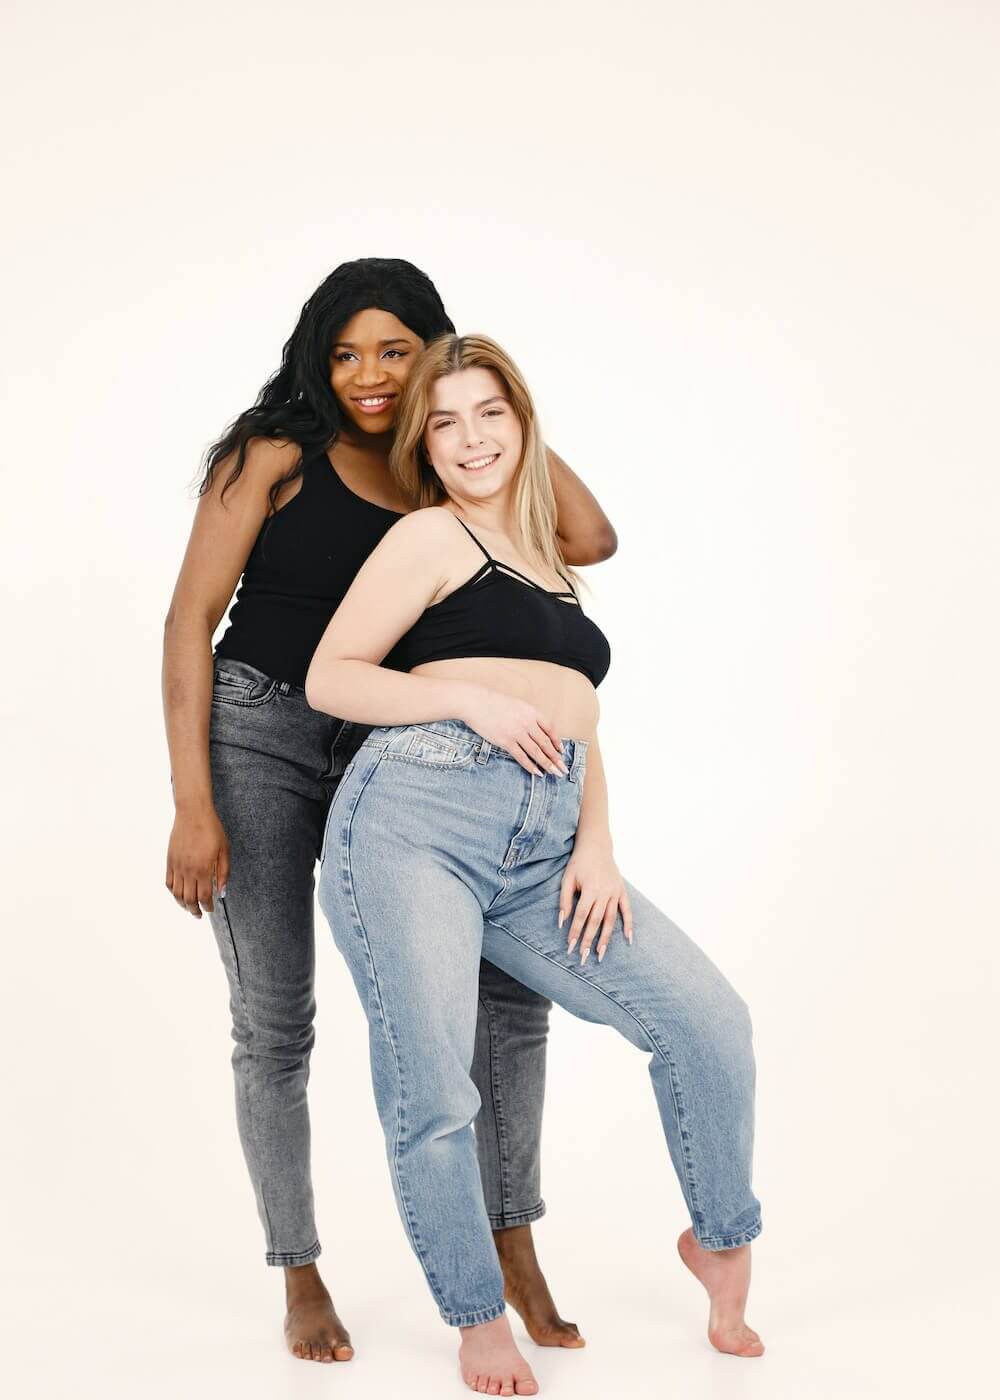 PCOS Sisters Two women in jeans posing for a photo.